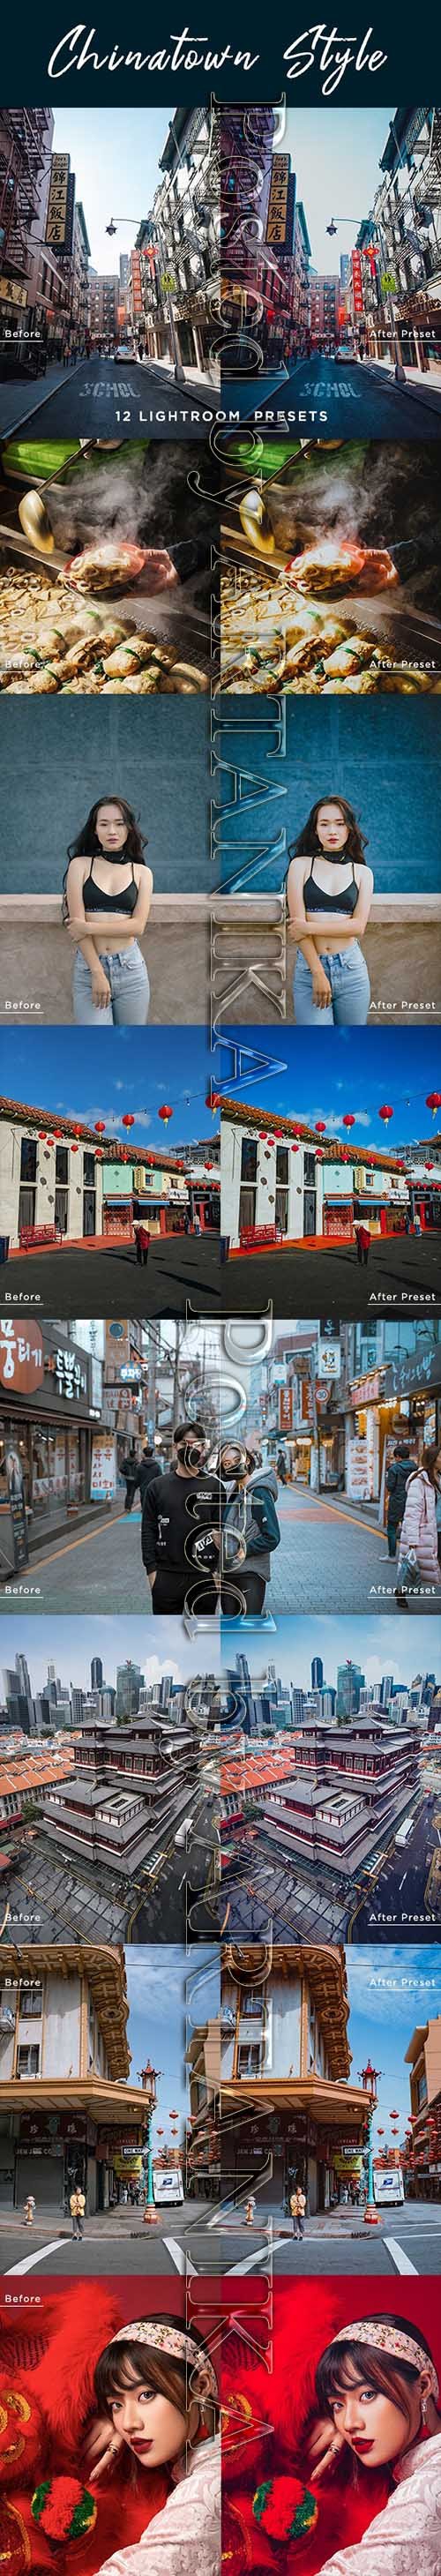 GraphicRiver - Chinatown Style Lightroom Presets 23566040